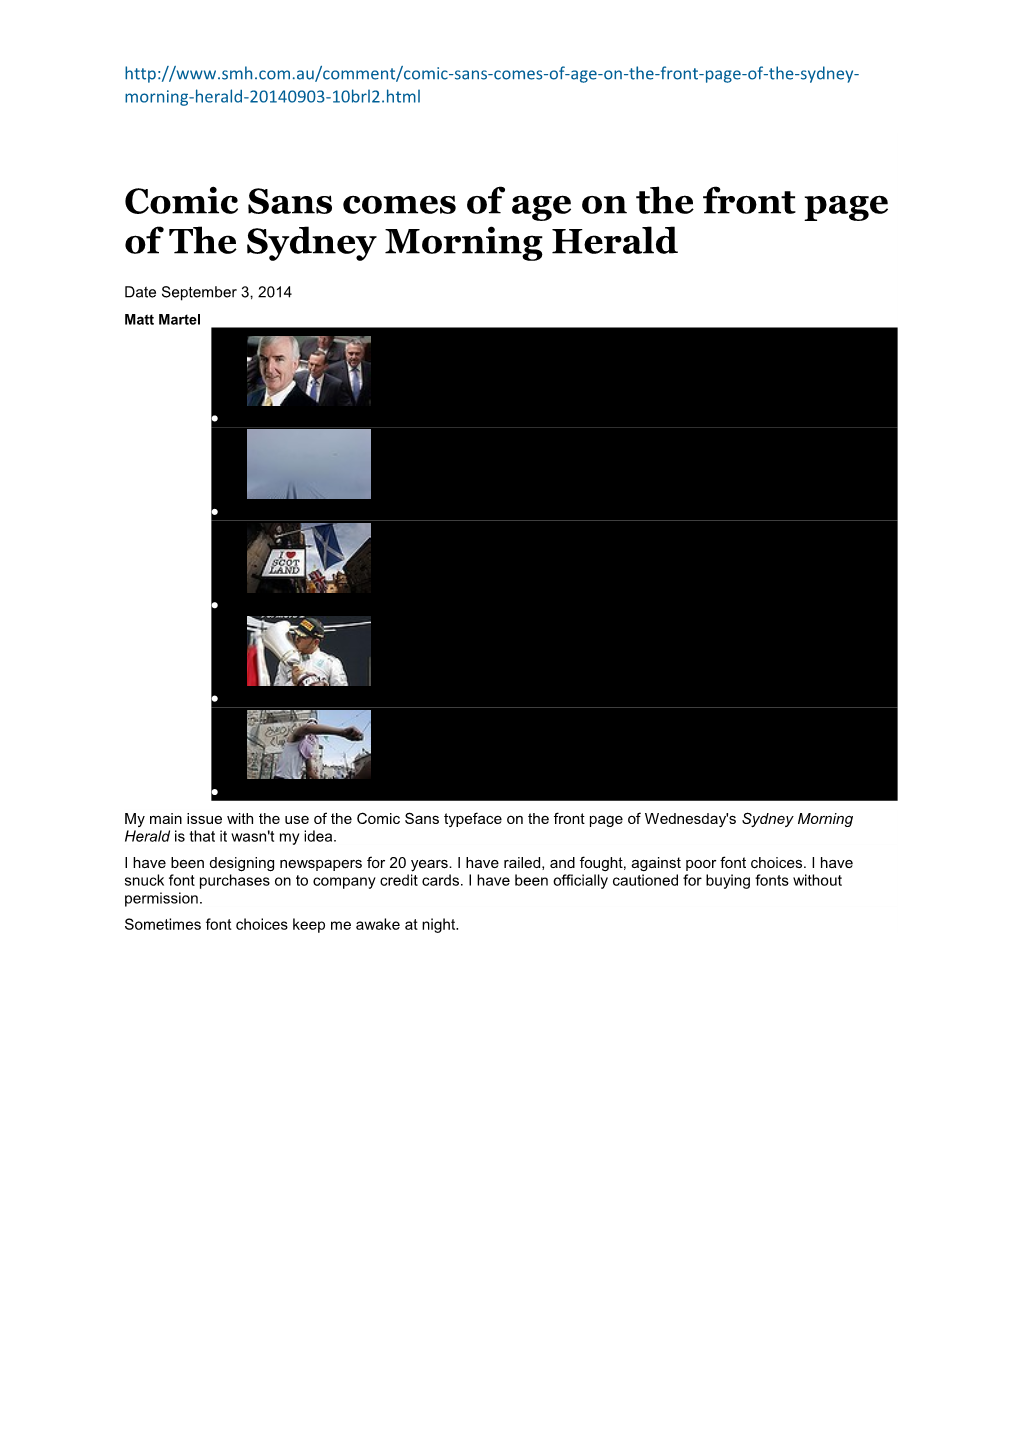 Comic Sans Comes of Age on the Front Page of the Sydney Morning Herald